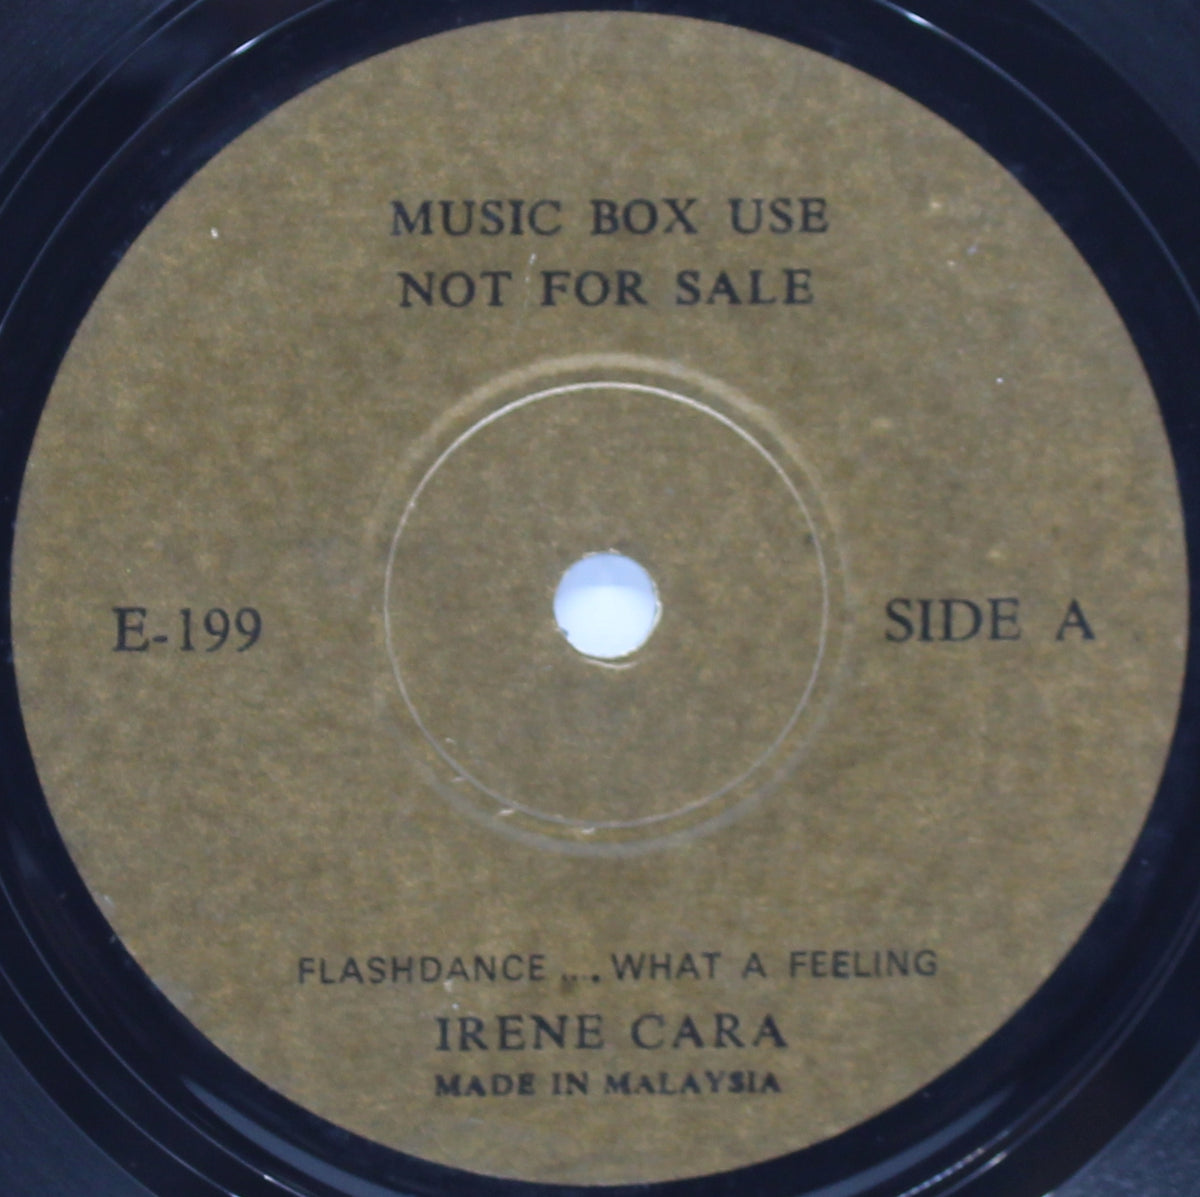 Bee Gees and Irene Cara, Music Box Use &quot;Not for sale&quot;, Vinyl 7&quot; single (45rpm), Malaysia